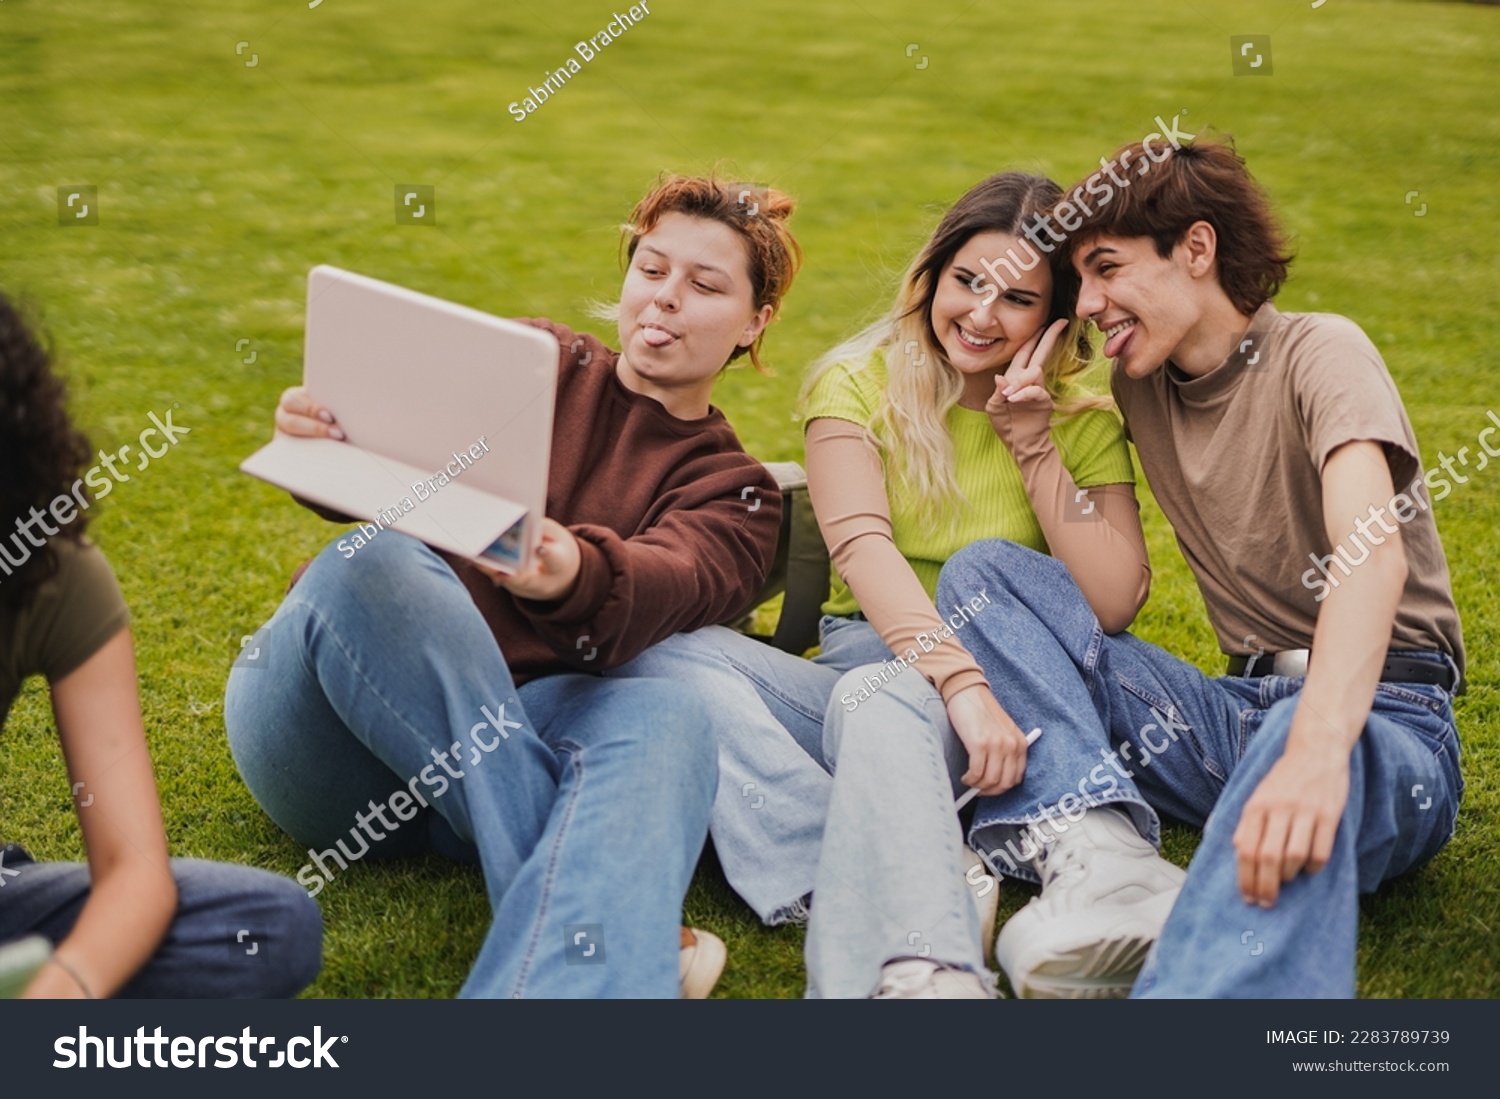 Young students having fun together taking a selfie with digital tablet while sitting outside of university meadow #2283789739